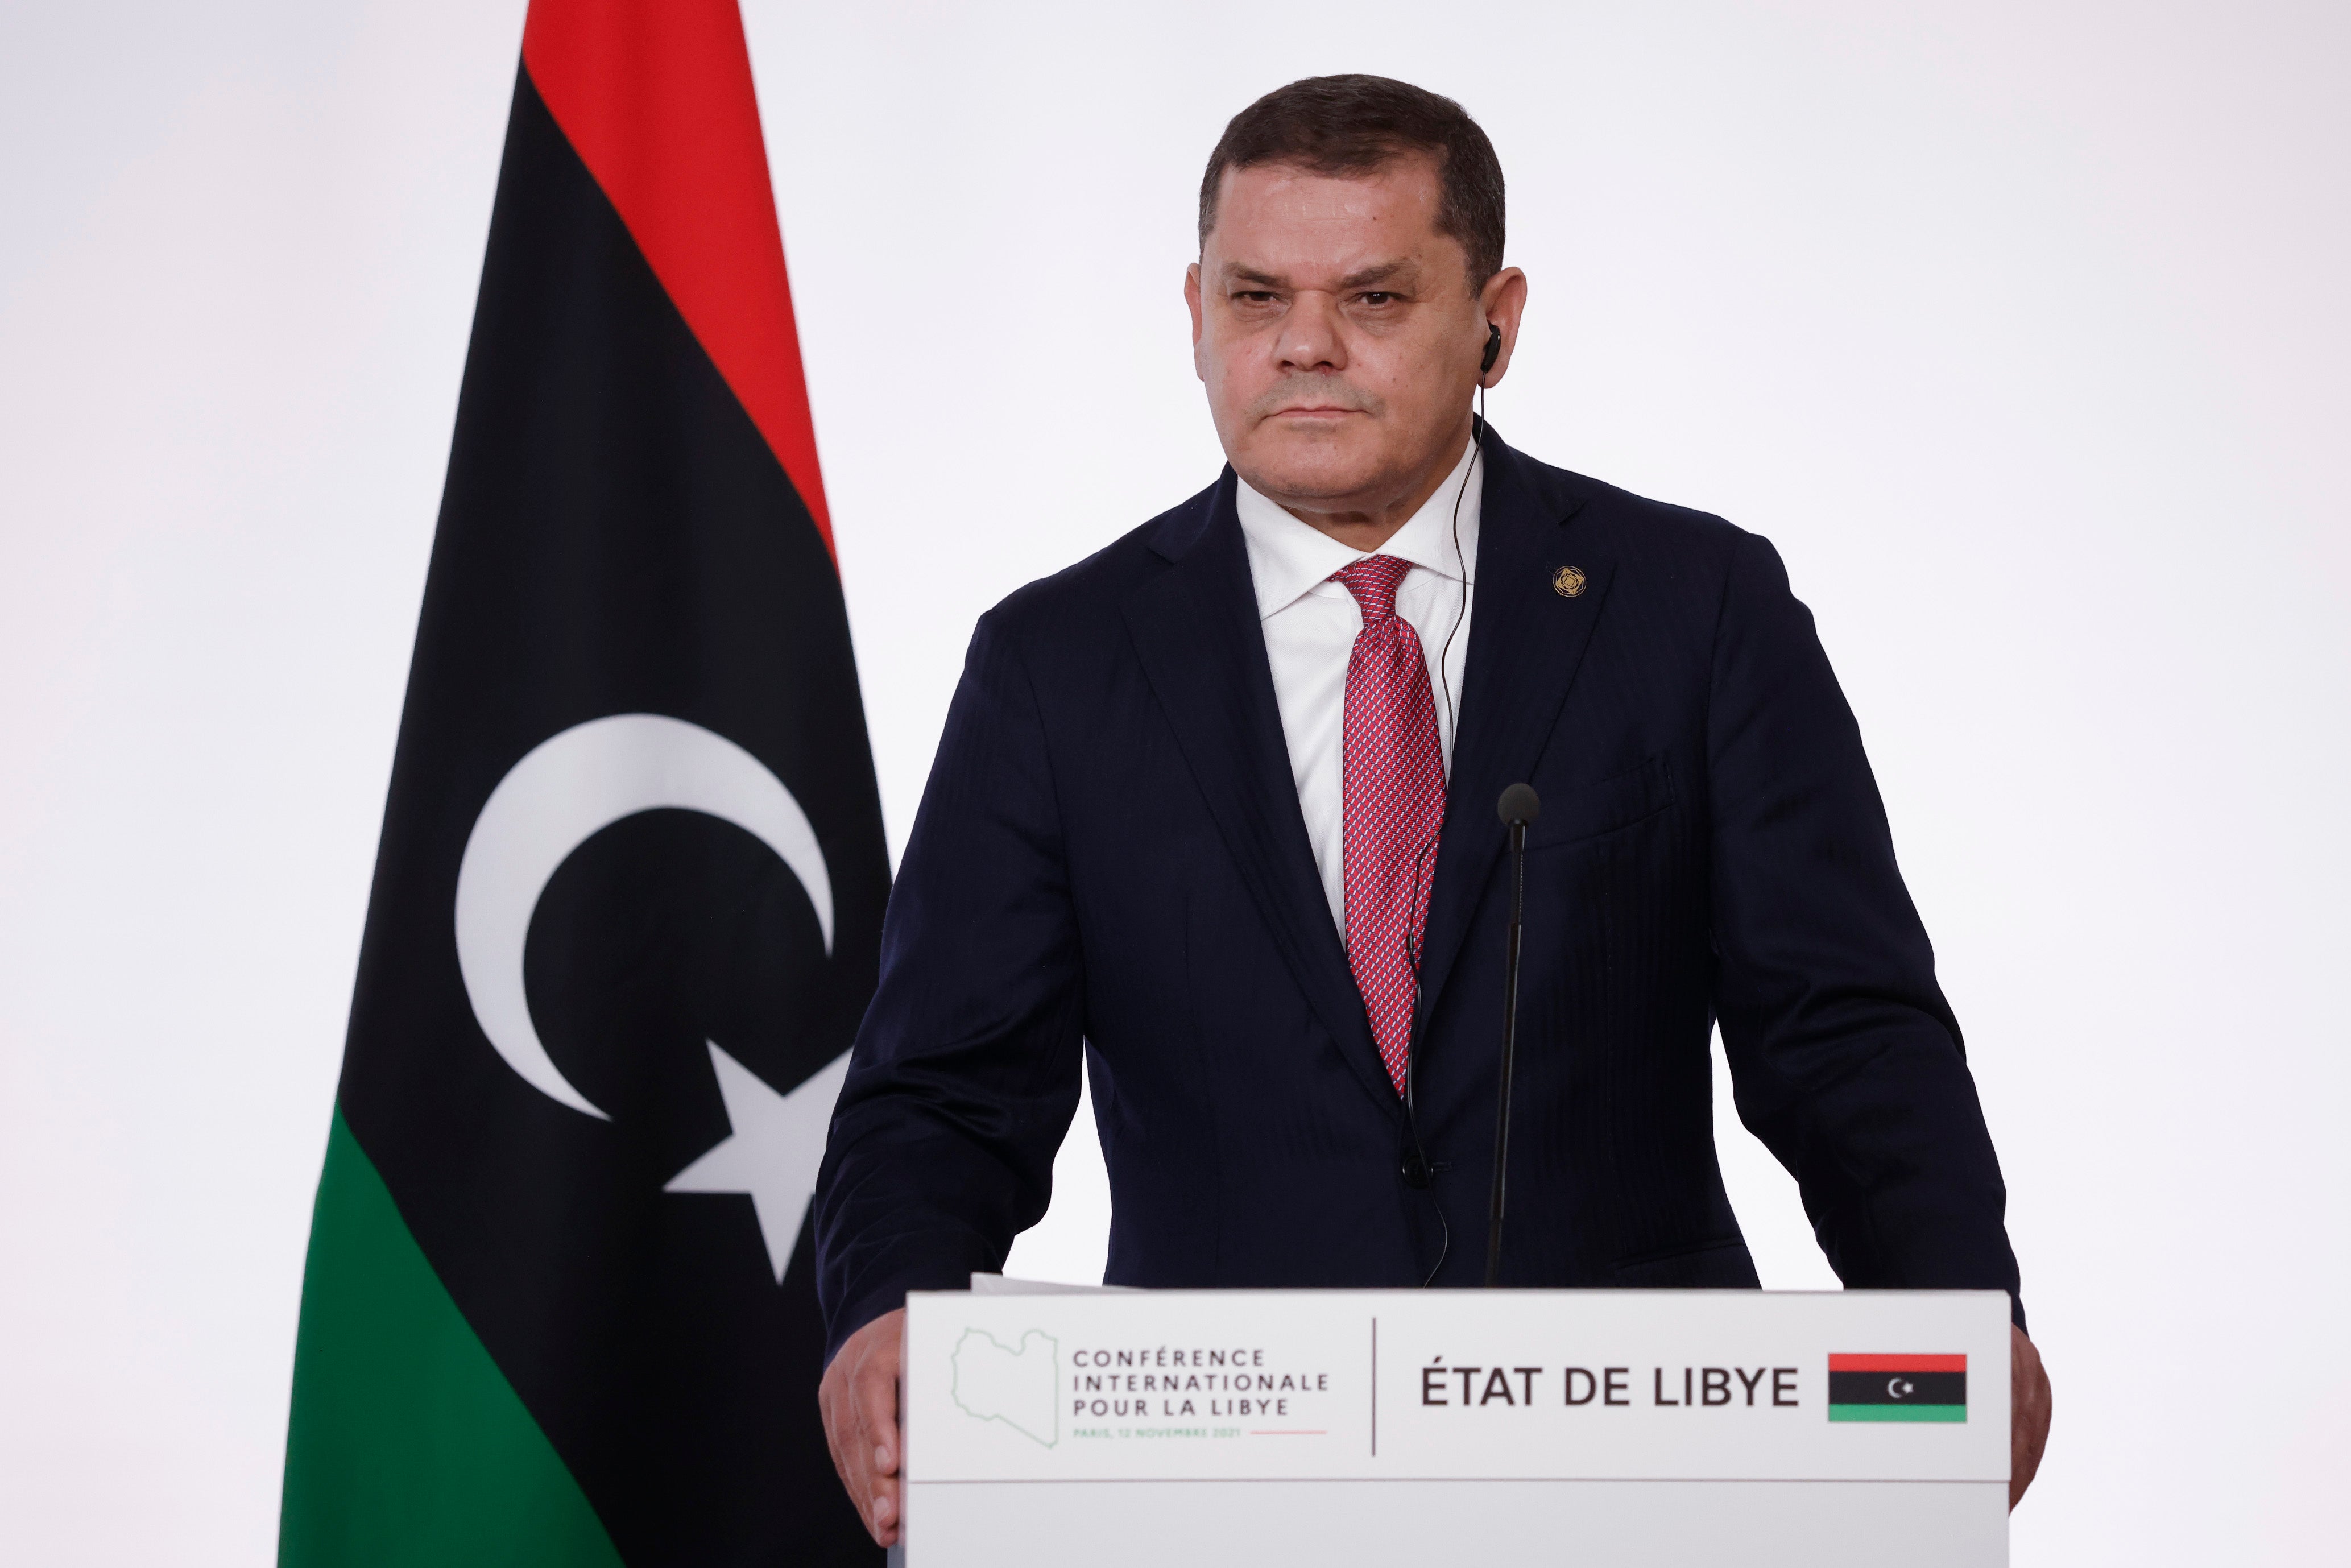 File photo: Libyan Prime Minister Abdul Hamid Dbeibah at a press conference in Paris, France, 12 November 2021